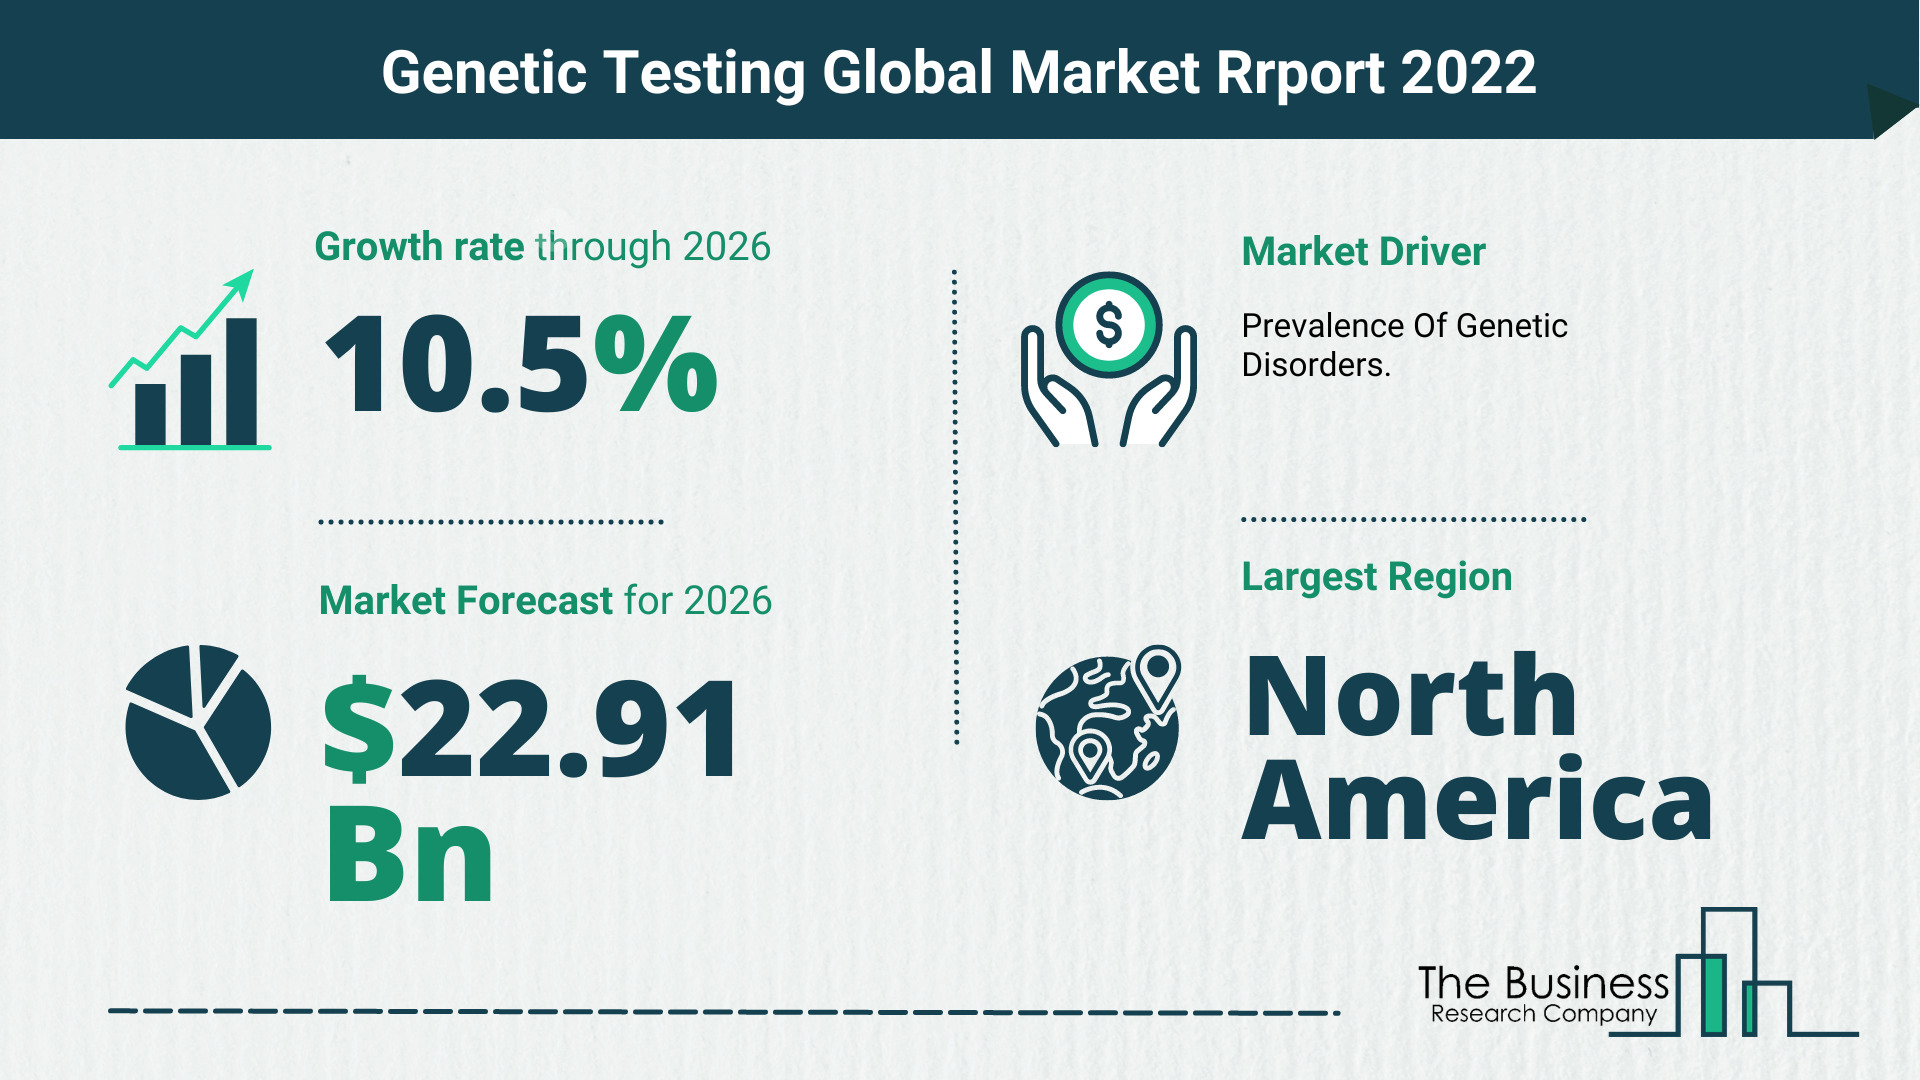 Latest Genetic Testing Market Growth Study 2022-2026 By The Business Research Company